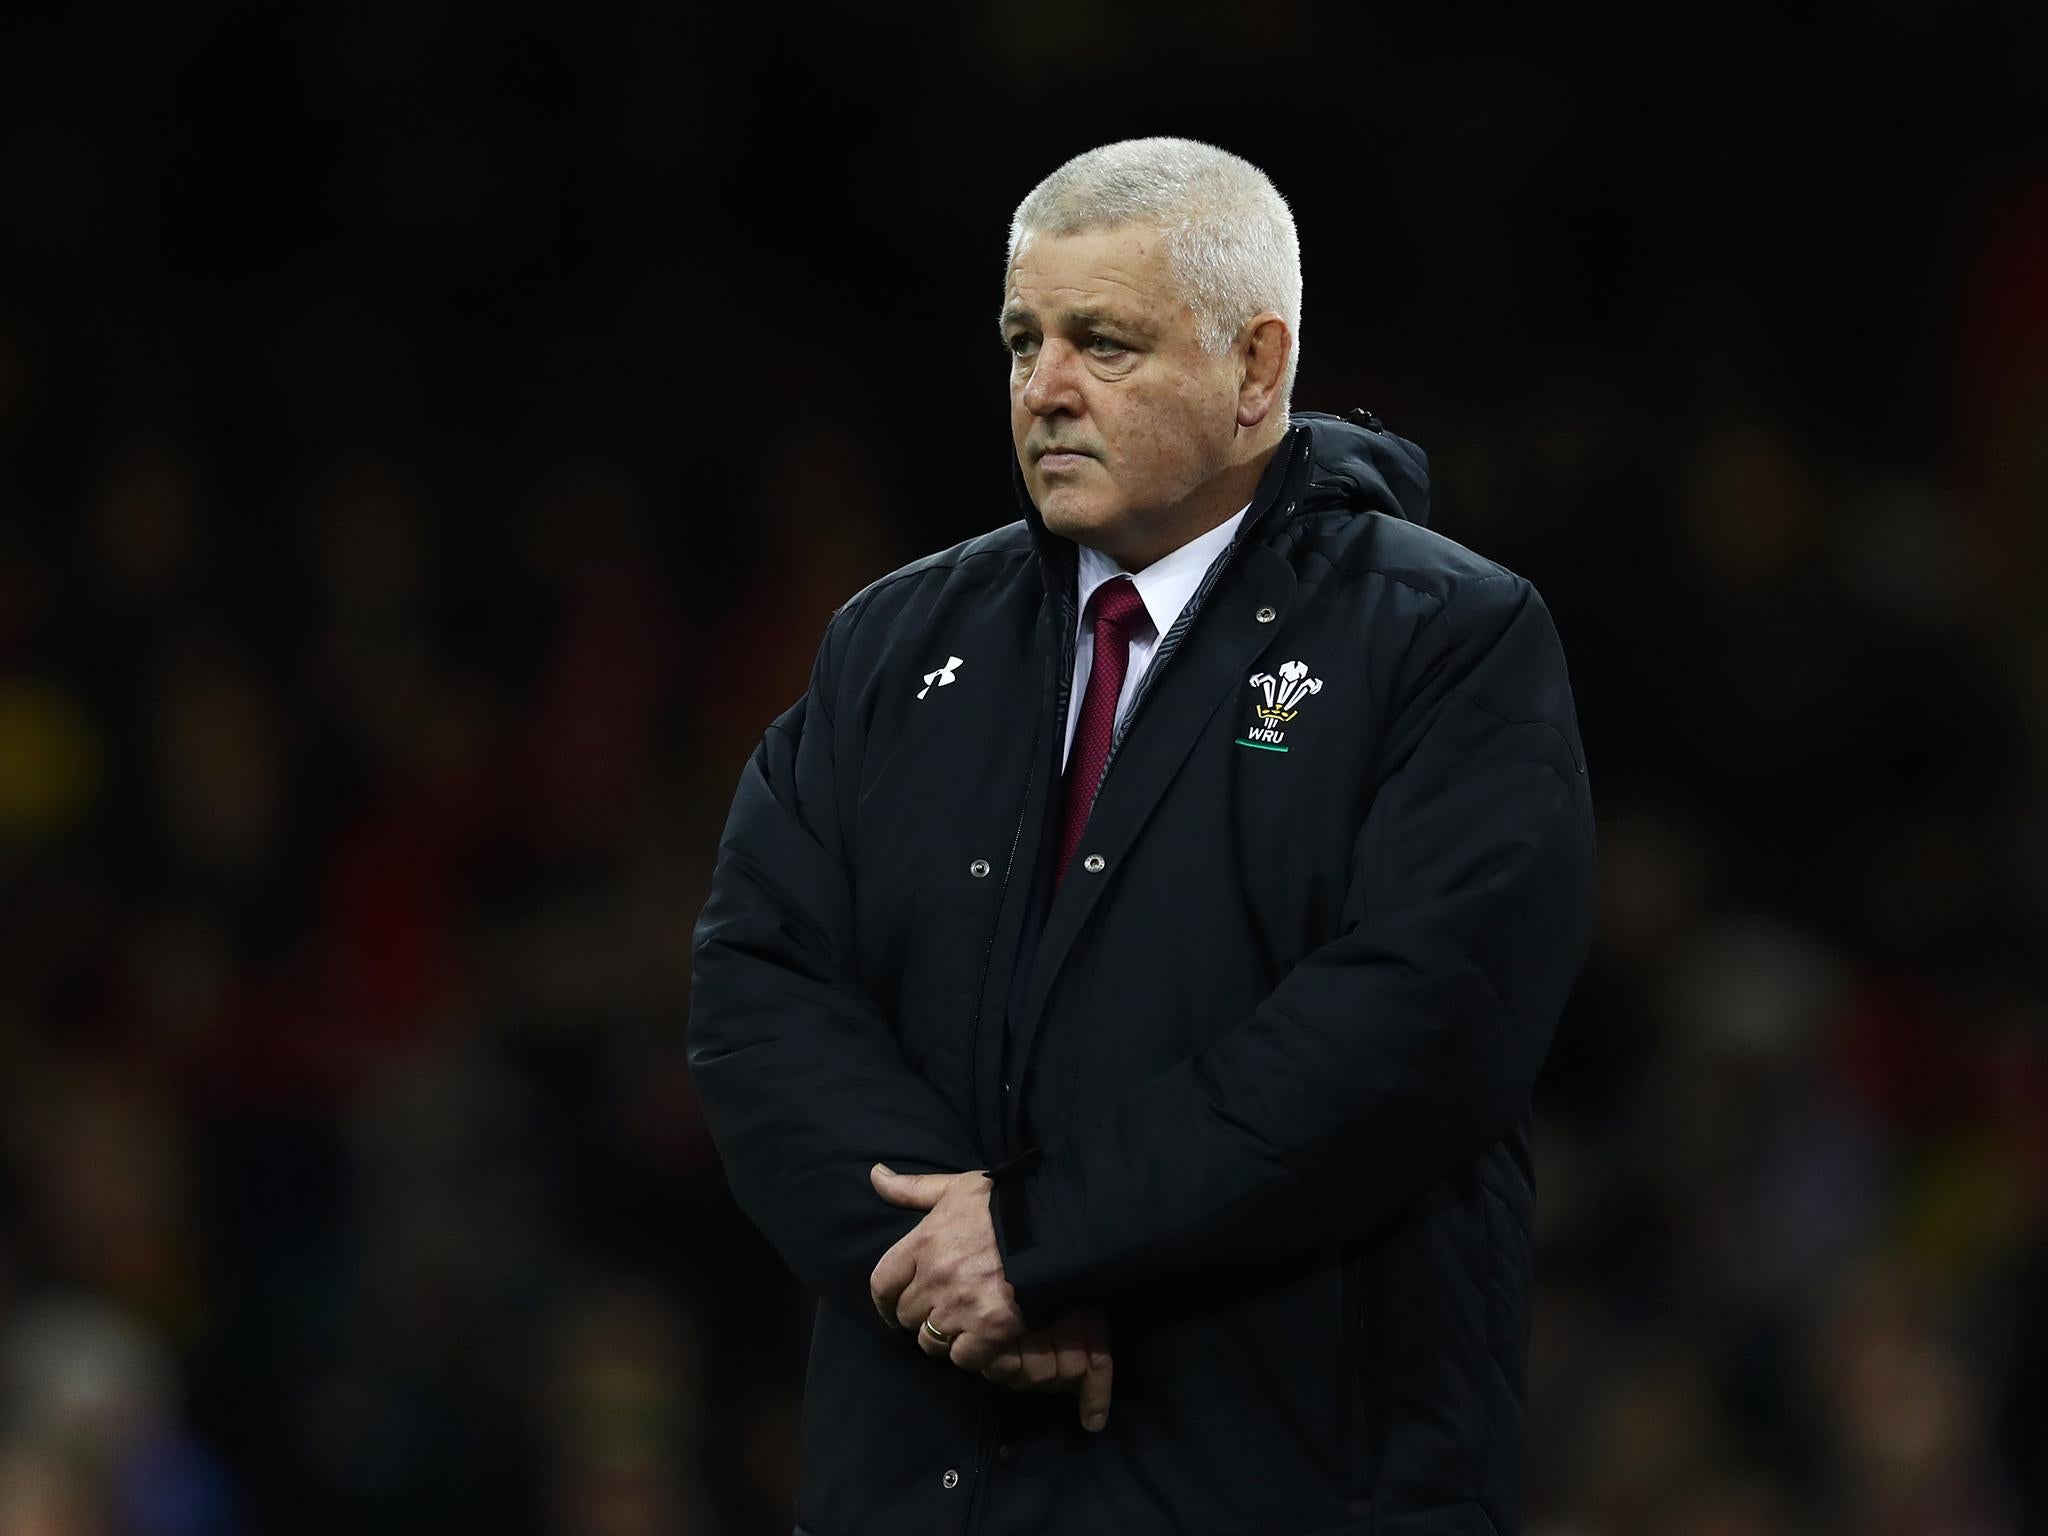 The Welsh Rugby Union expect Warren Gatland to lead Wales into the next Rugby World Cup in 2019